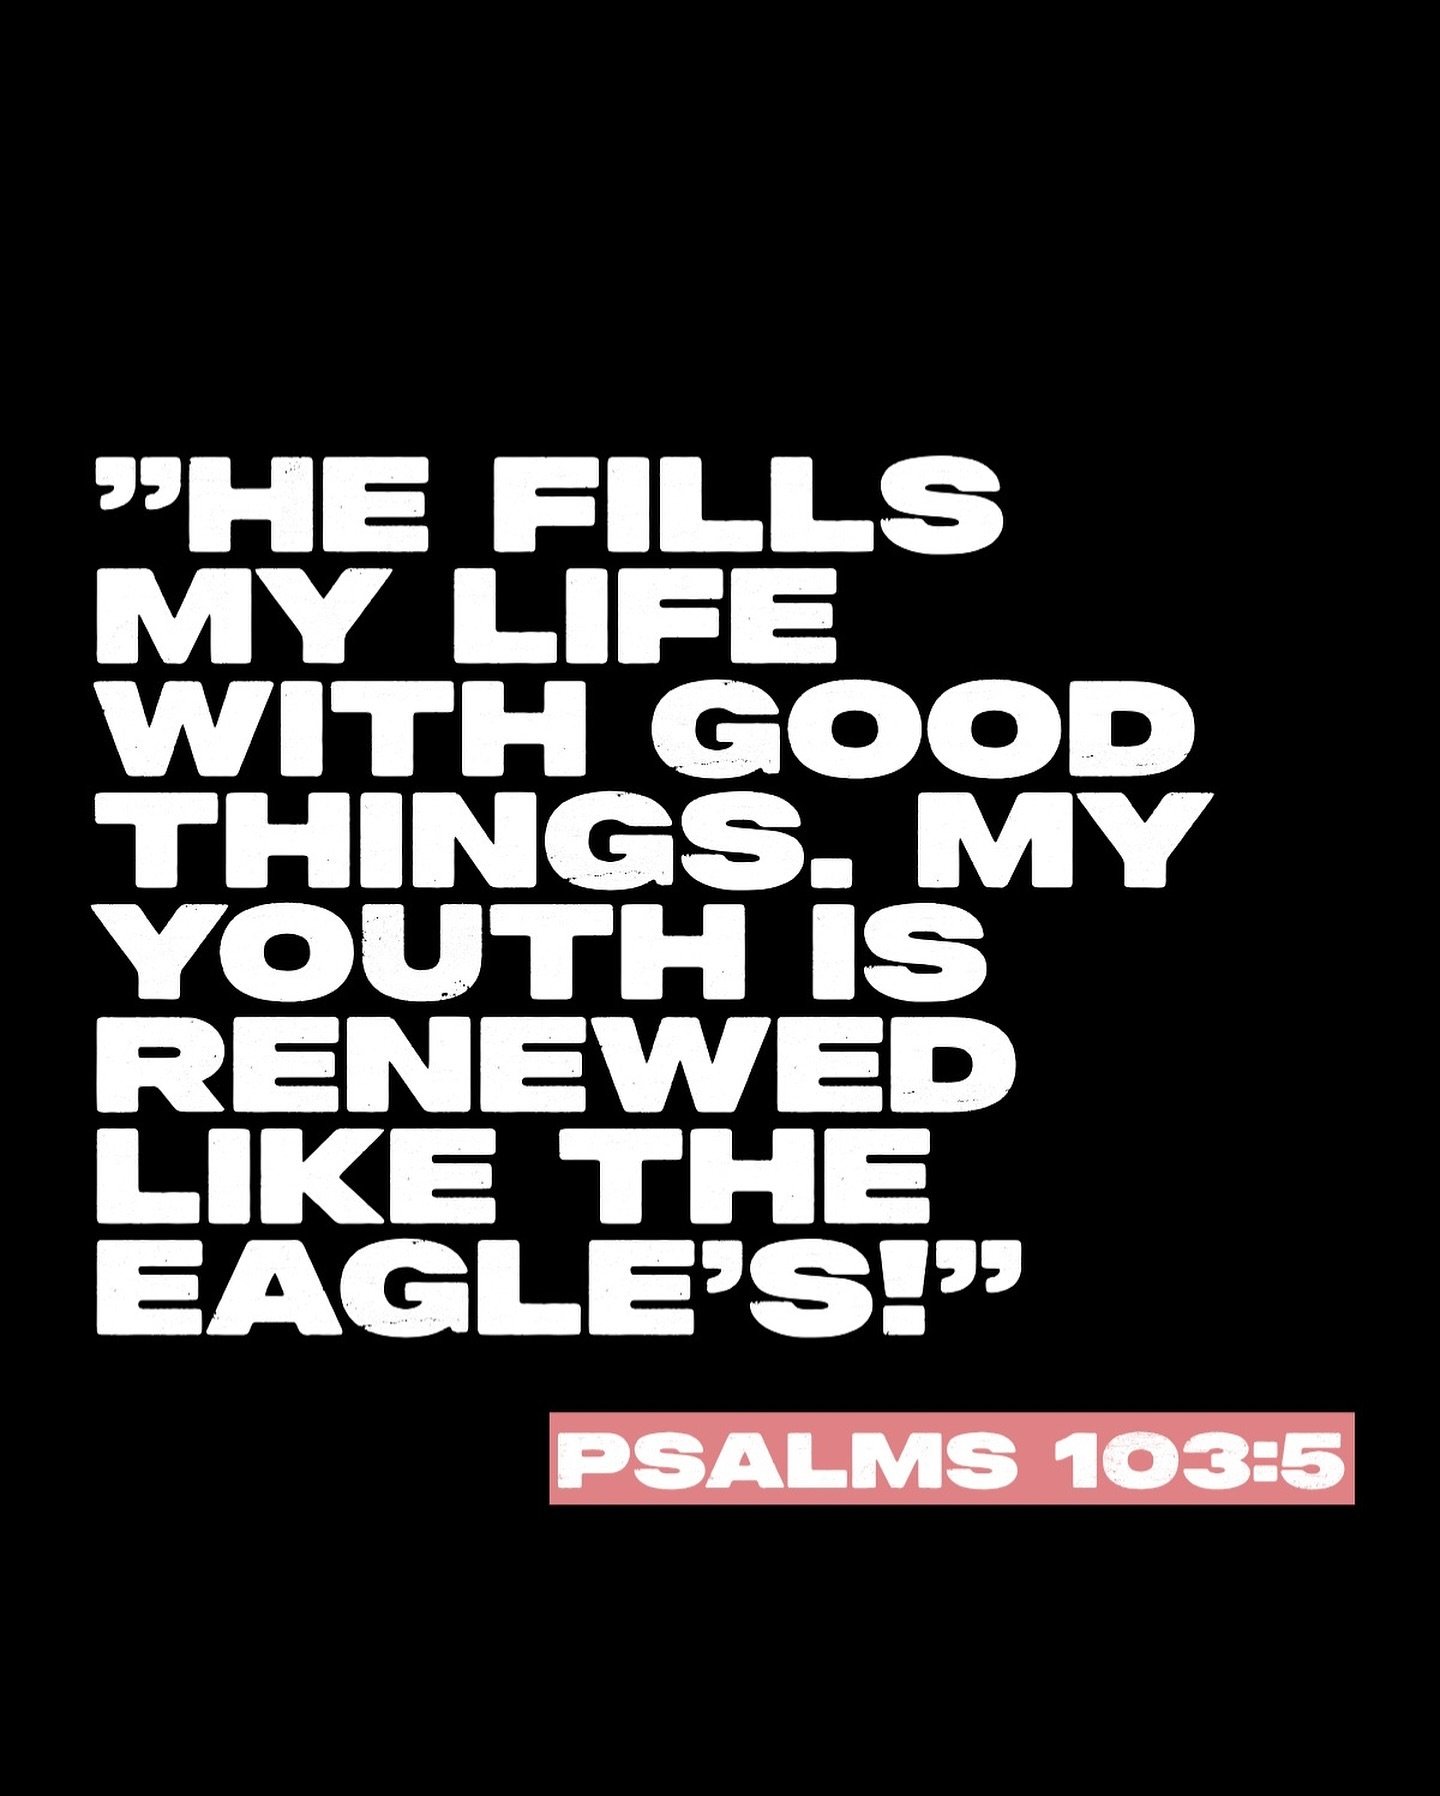 &rdquo;He fills my life with good things. My youth is renewed like the eagle&rsquo;s!&ldquo;
‭‭Psalms‬ ‭103‬:‭5‬ ‭NLT‬‬

#faithcenter #good #youth